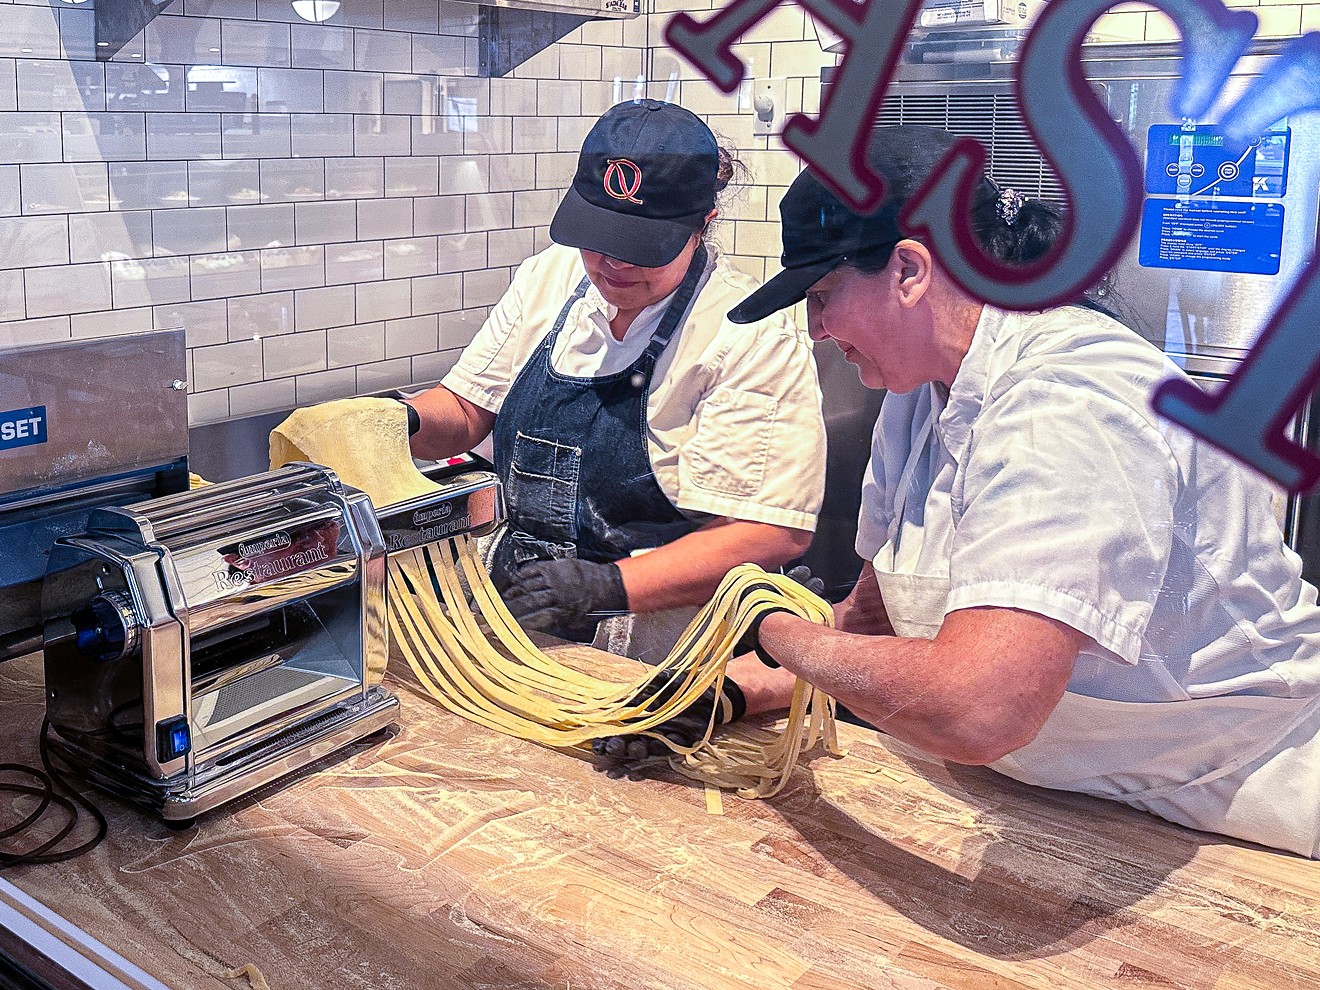 Quartino offers several varieties of pasta made fresh each day in house. You can watch the preparation while you're waiting for your salumi to arrive.